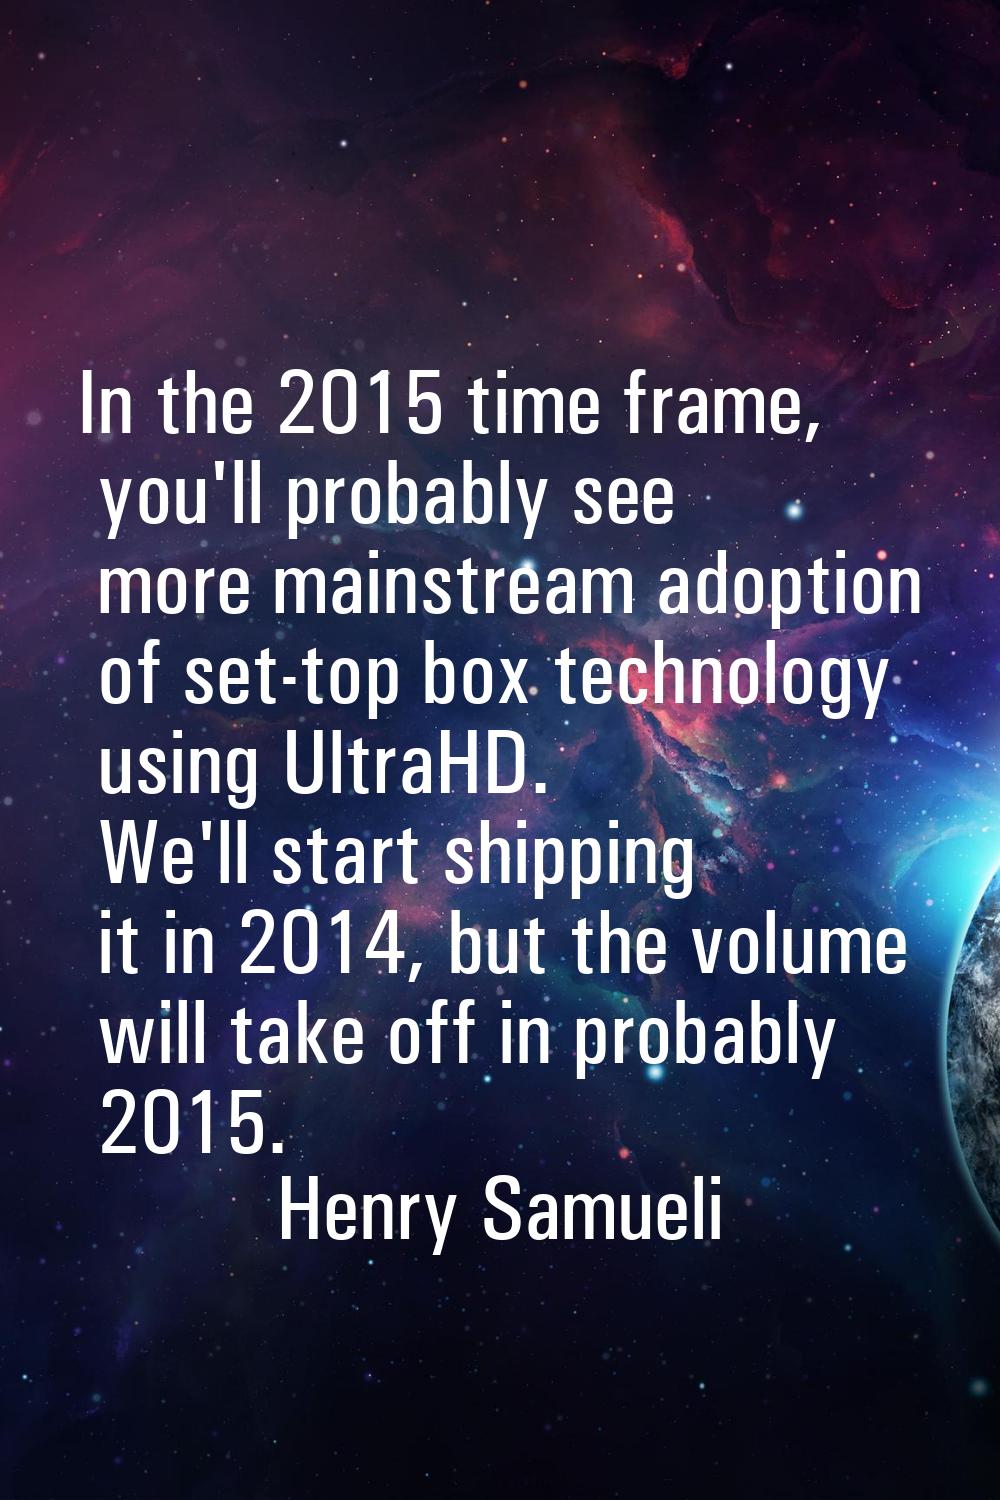 In the 2015 time frame, you'll probably see more mainstream adoption of set-top box technology usin